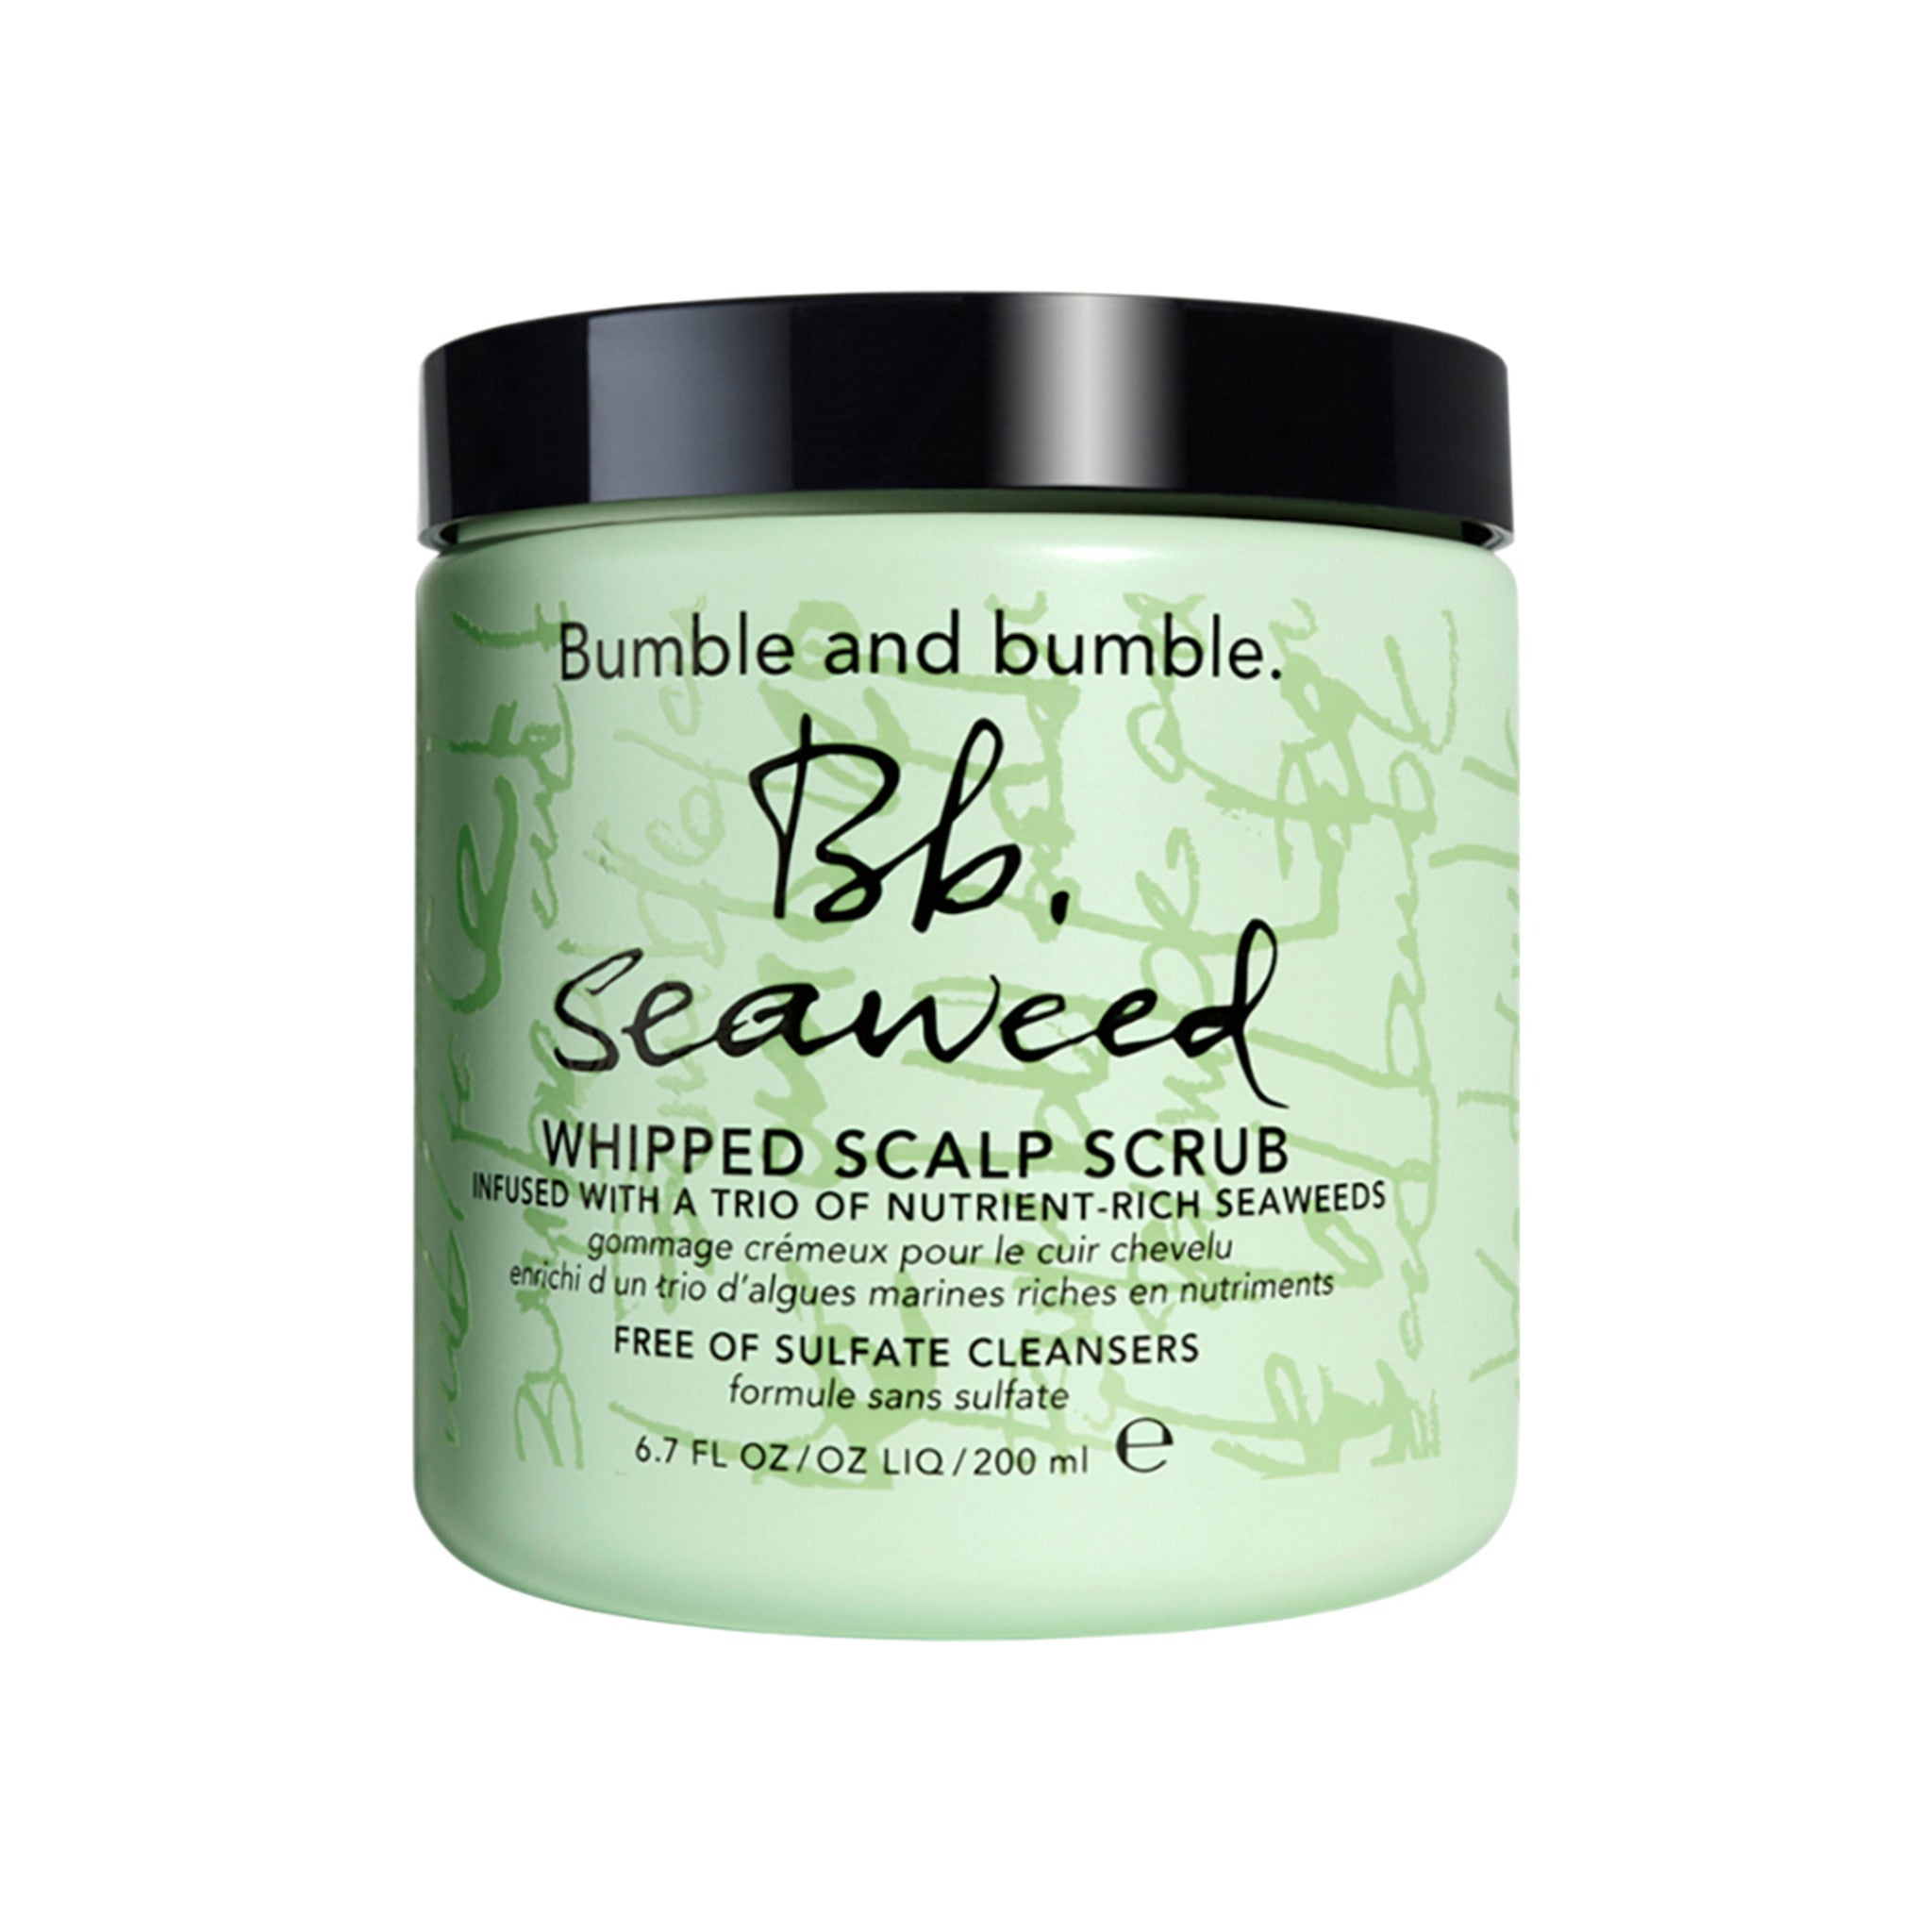 Bumble and Bumble Seaweed Whipped Scalp Scrub Size variant: 6.7 fl oz main image.